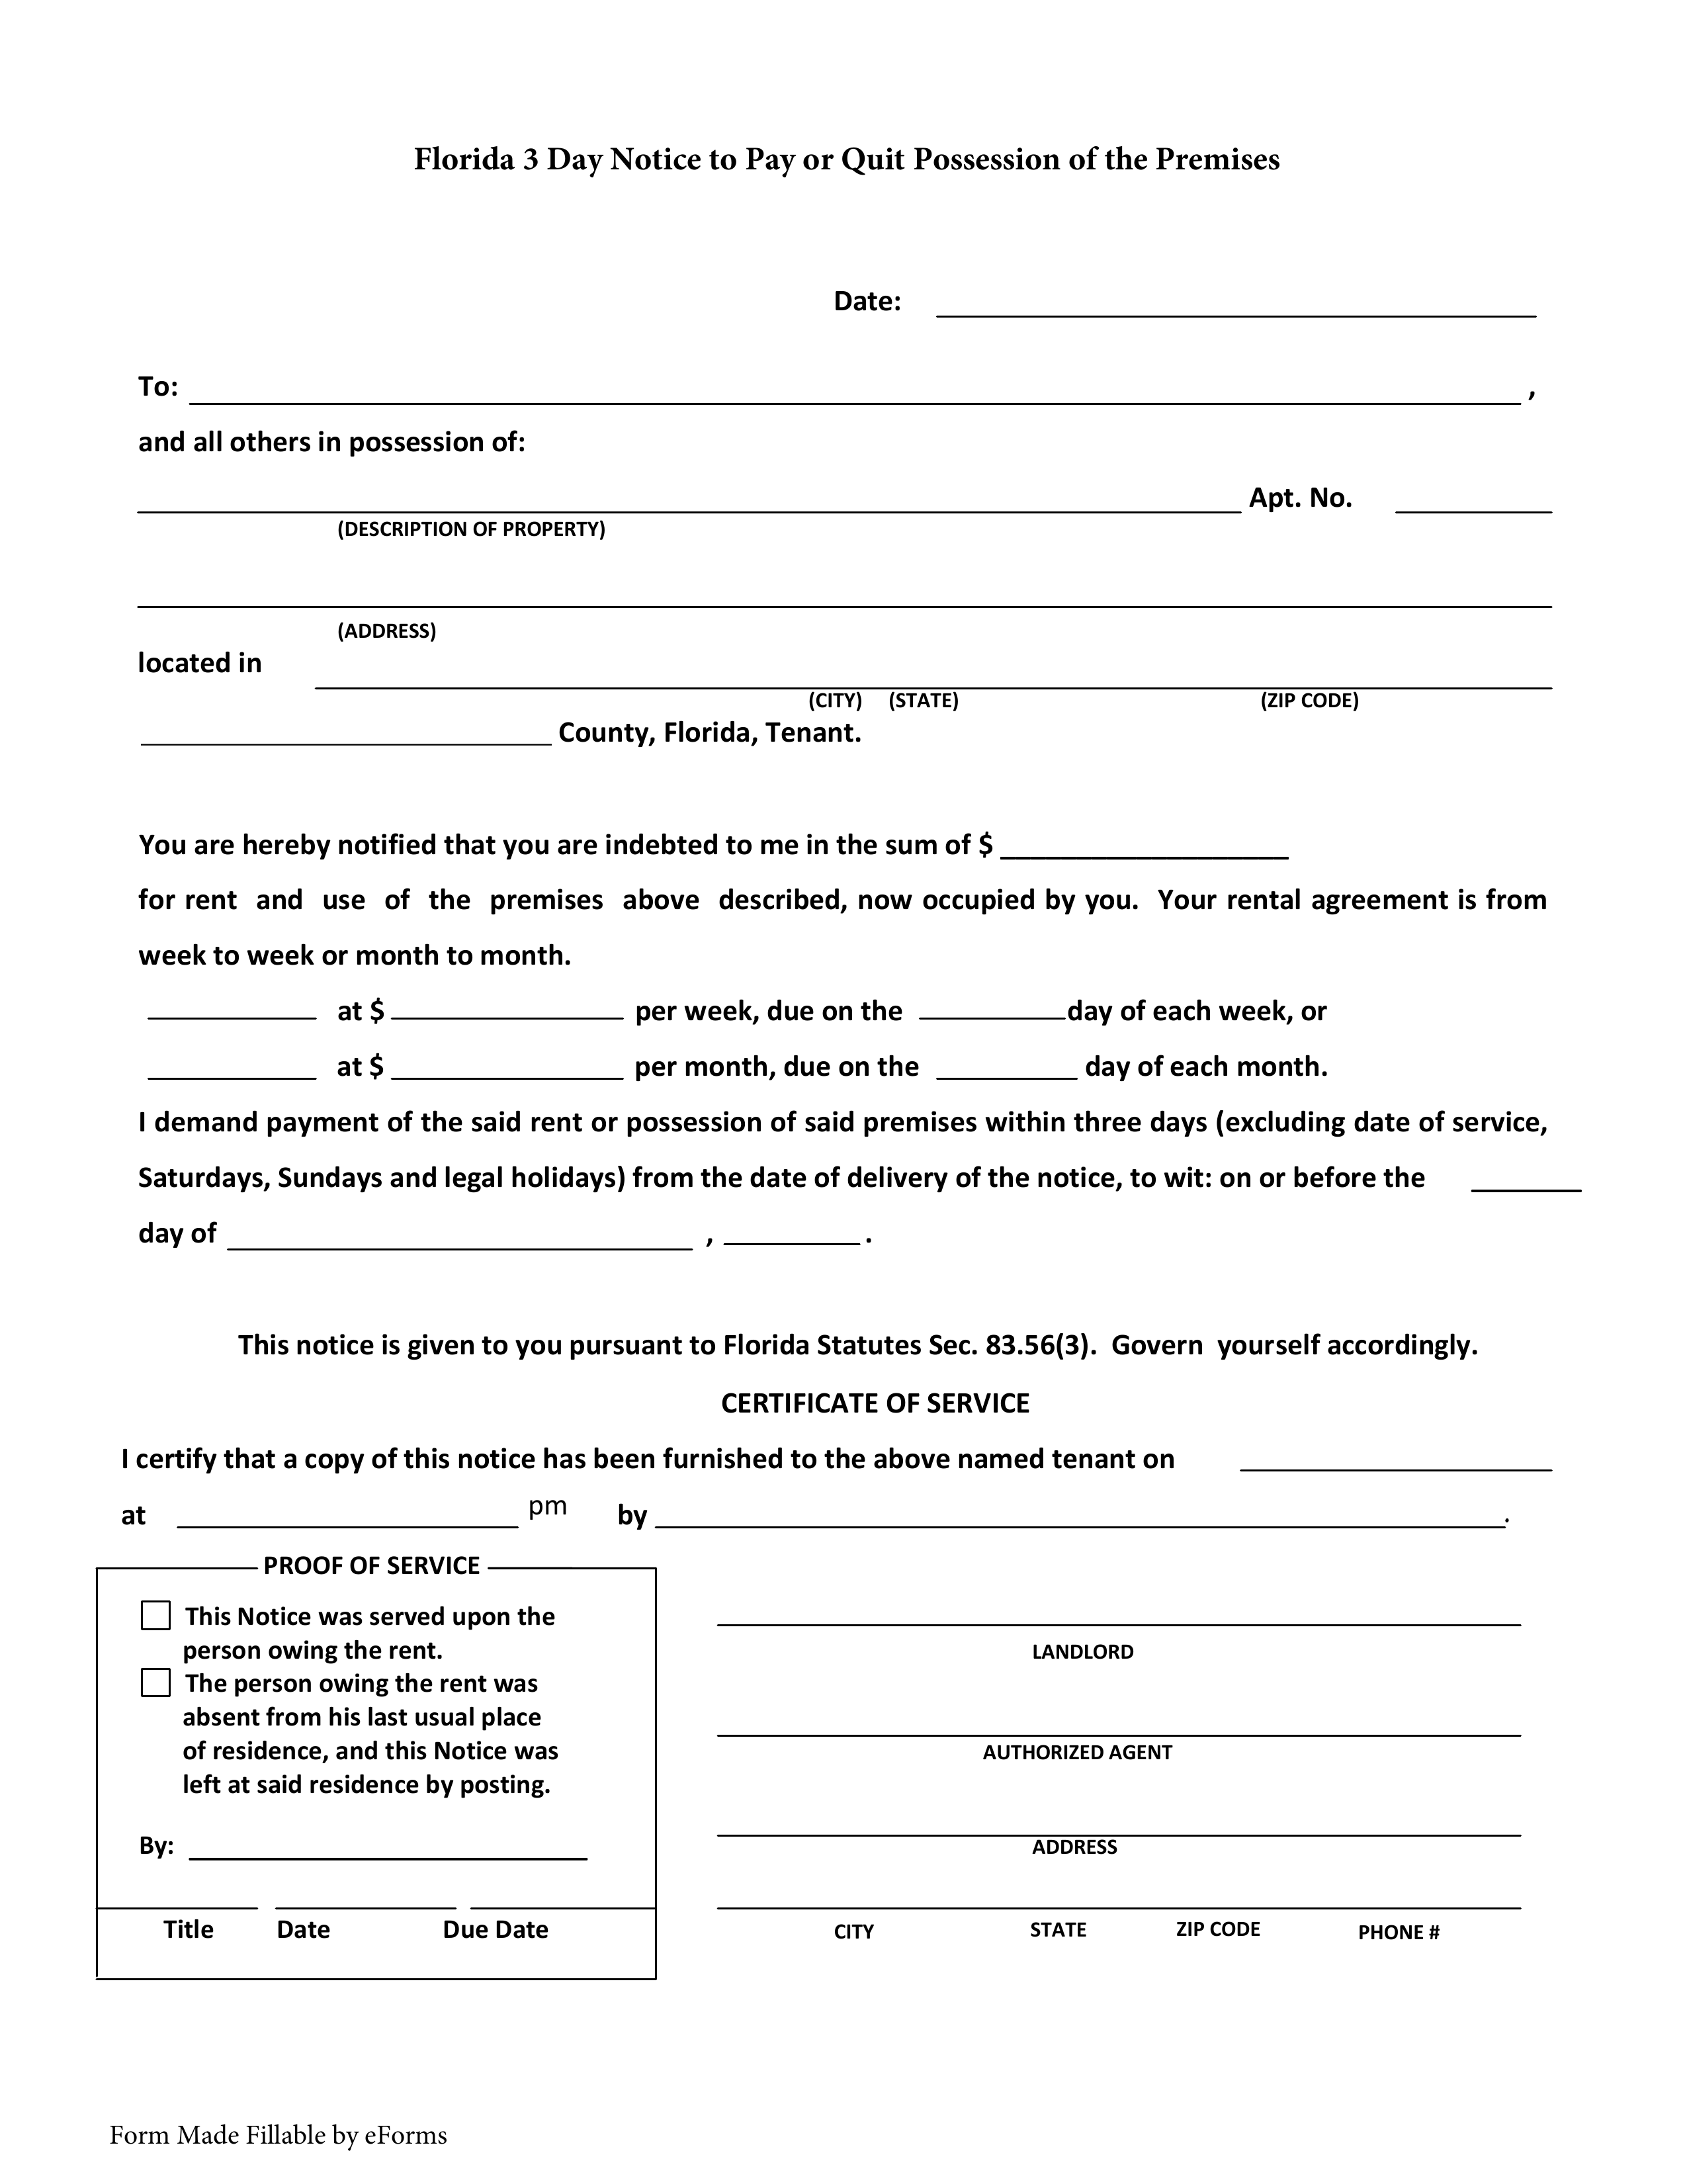 Florida 3-Day Notice to Quit Form | Non-Payment of Rent